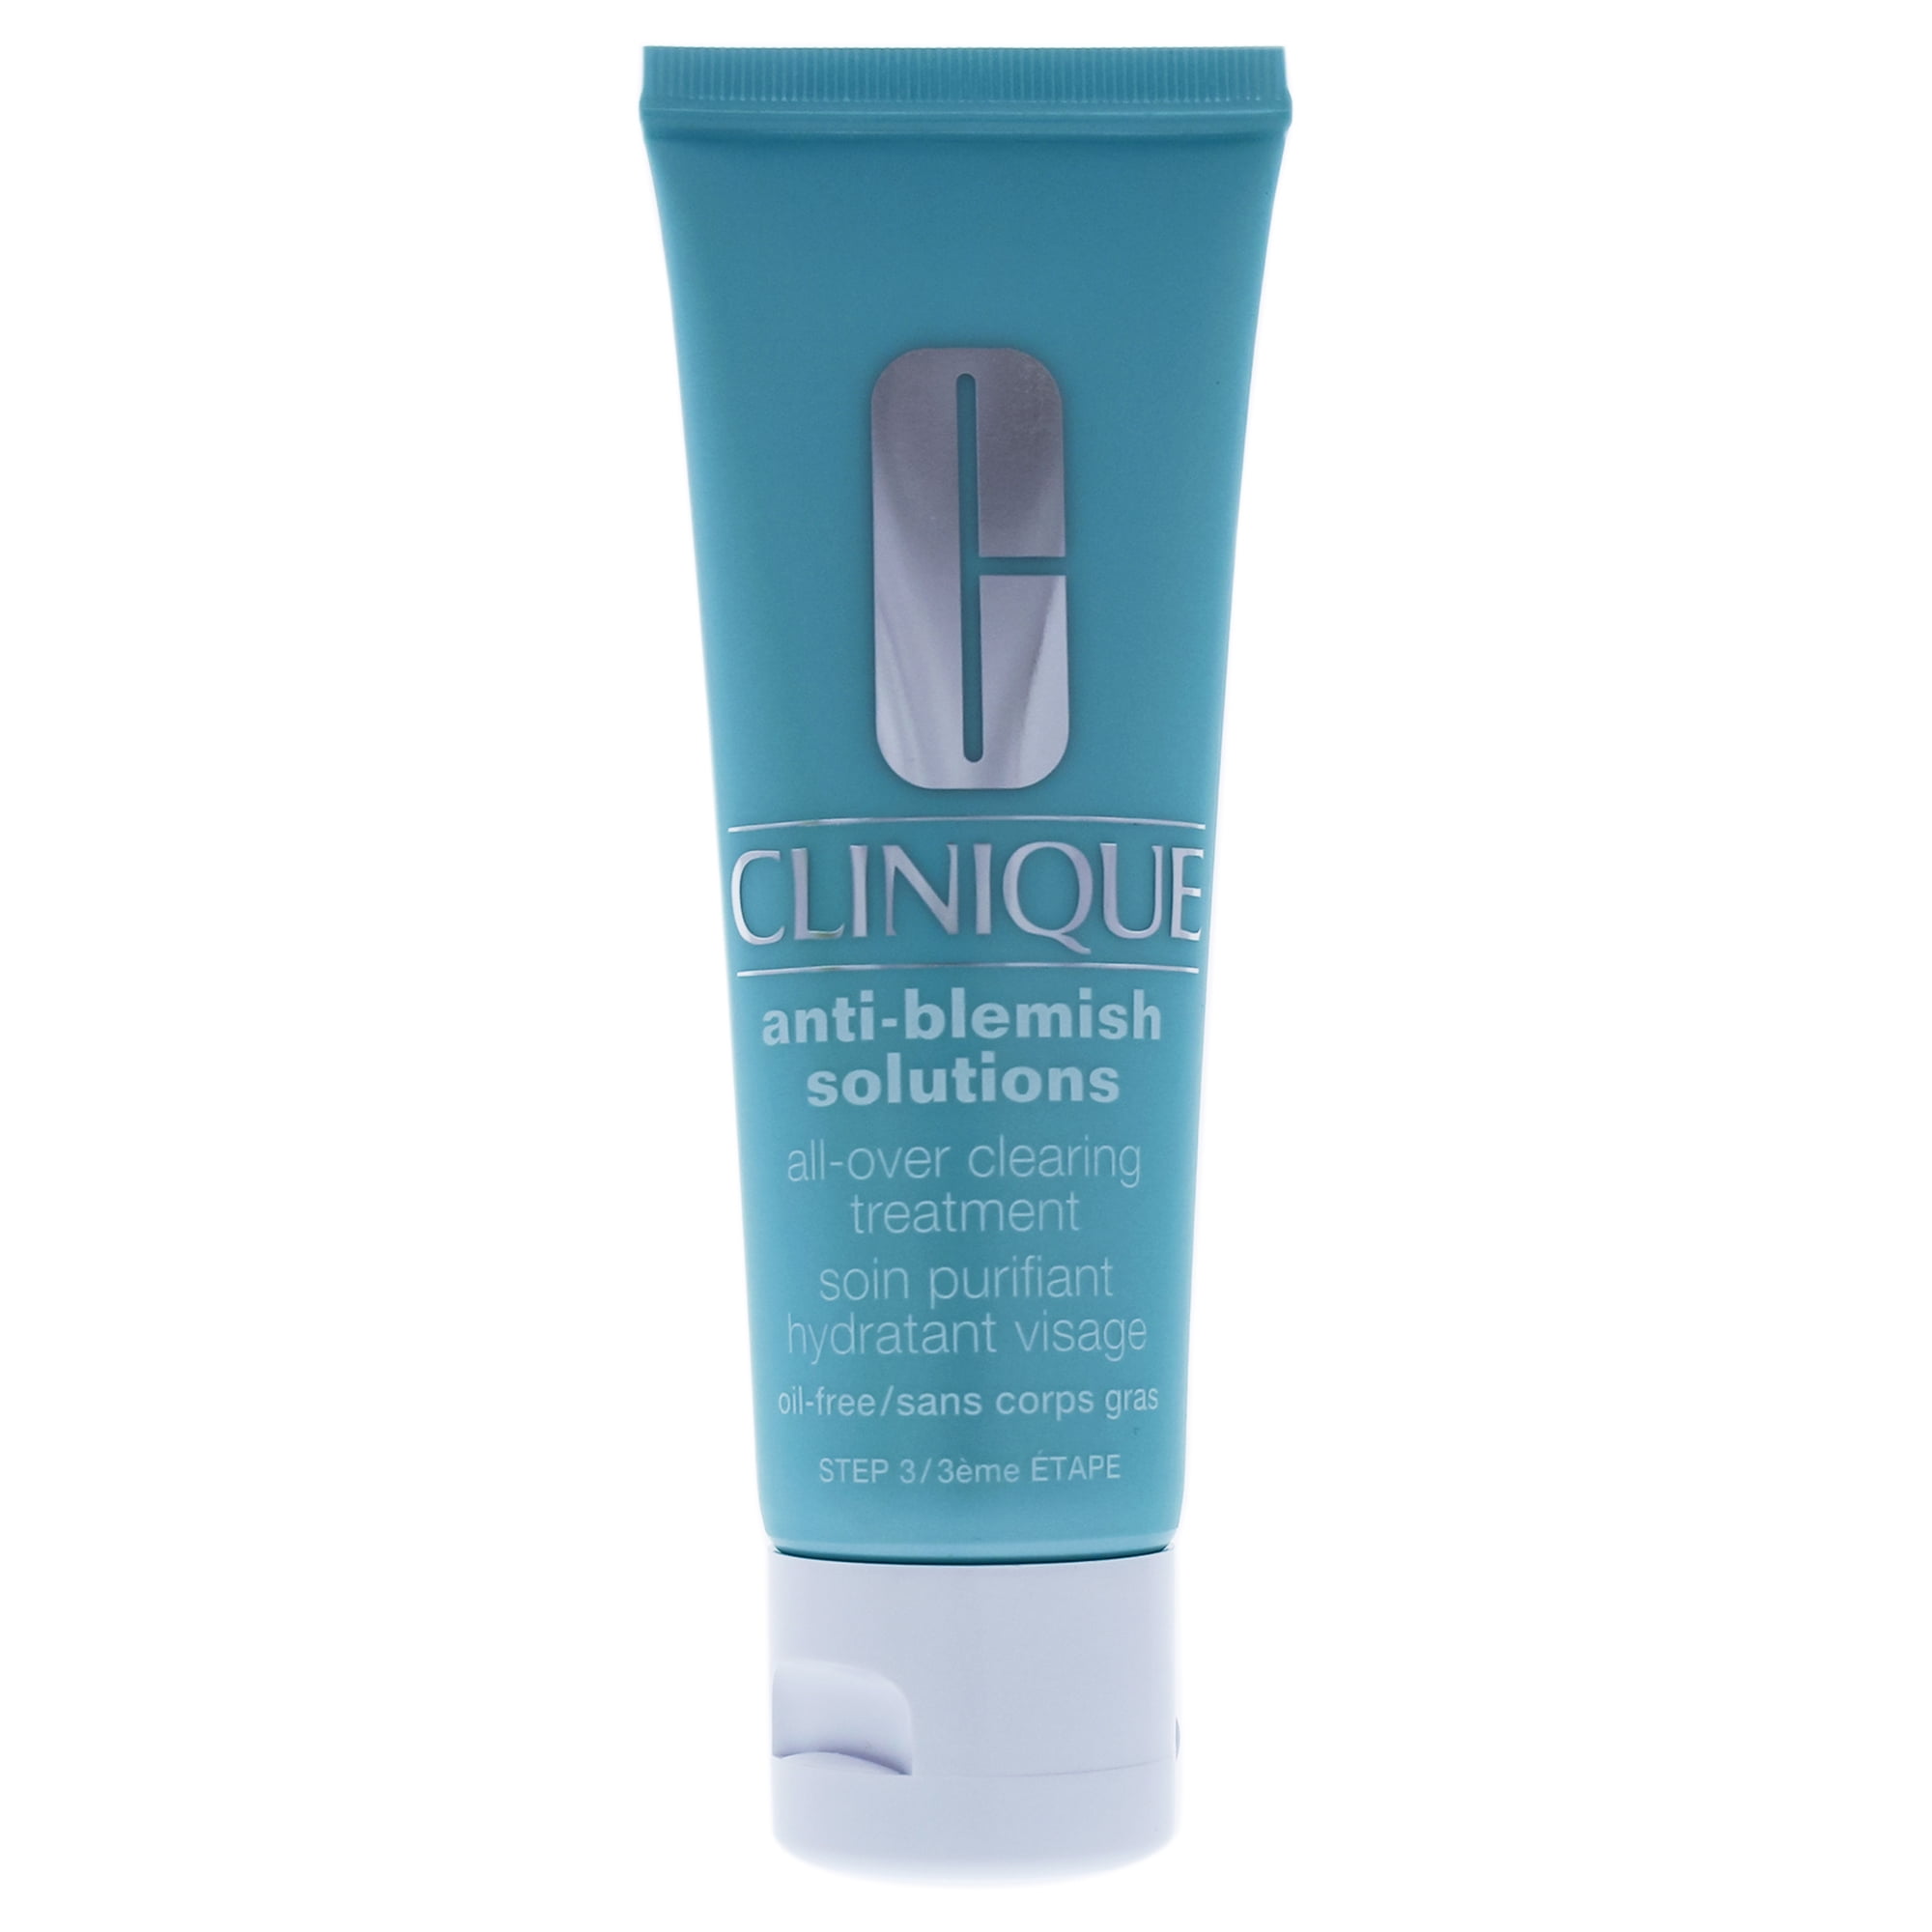 Oz 1.7 Clearing Fl All-Over Clinique Acne Treatment, Solutions